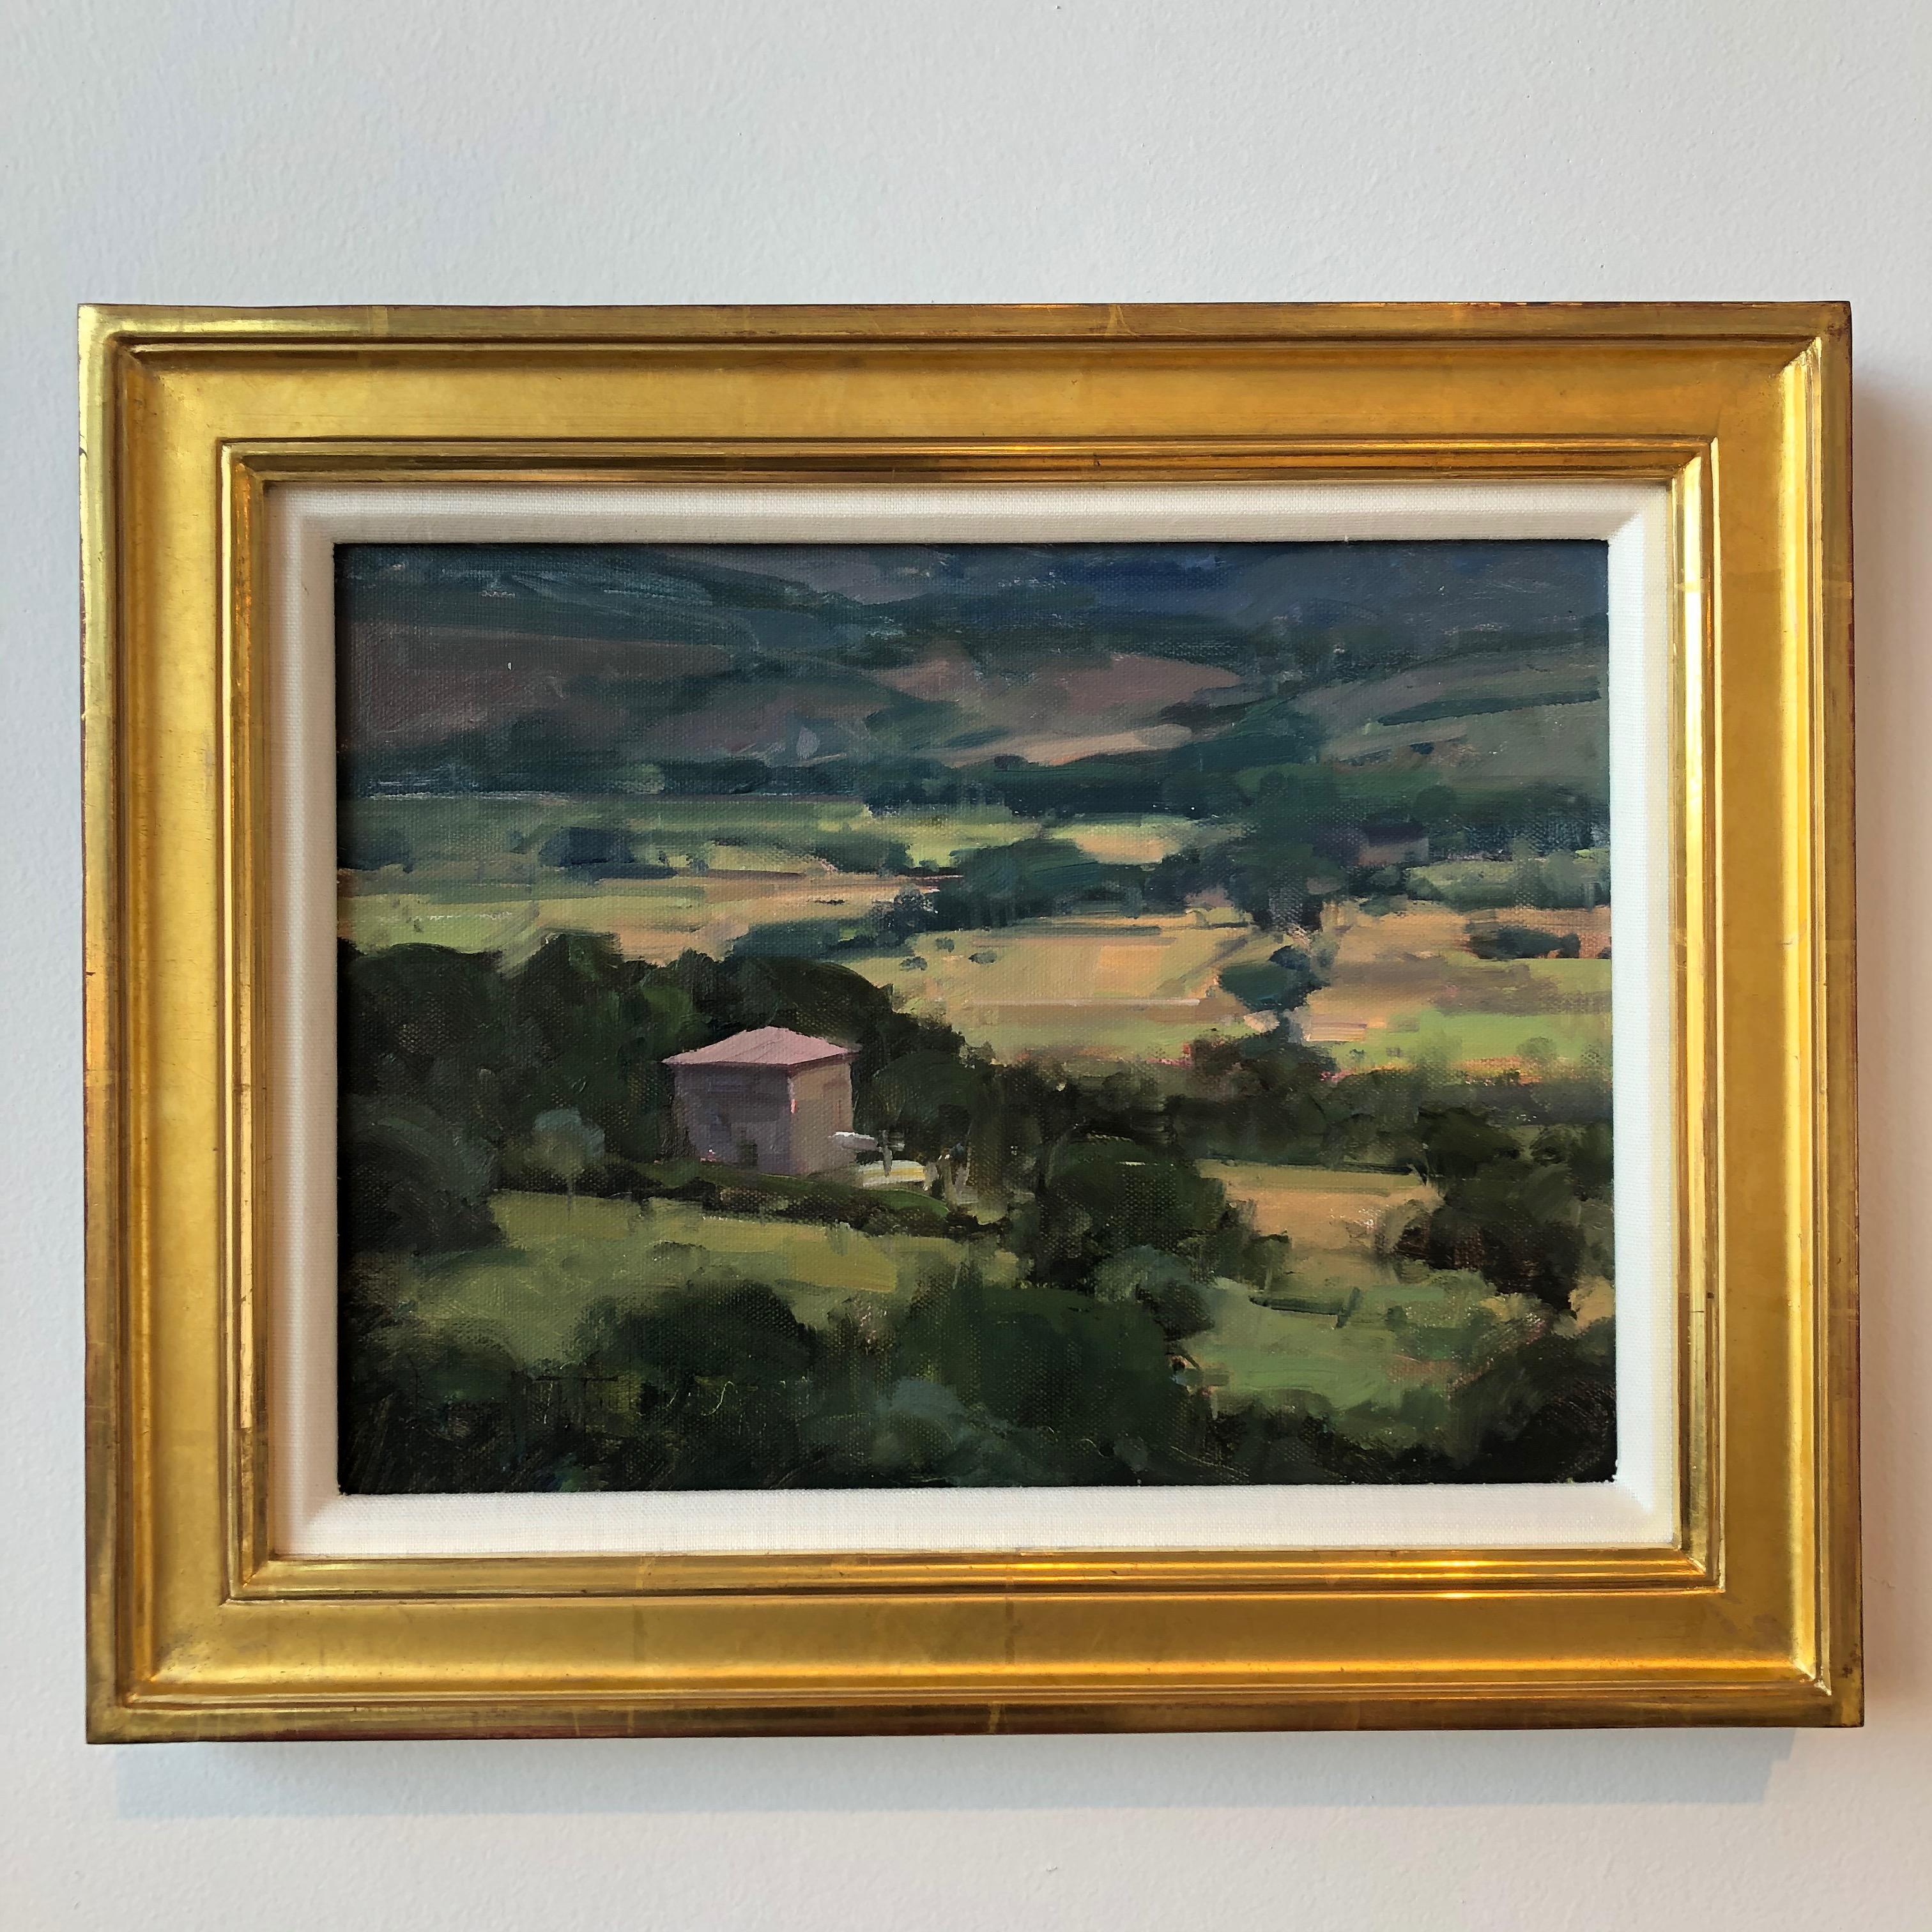 Umbrian landscape painting by Bryan Mark Taylor. Todi, Italy. In custom gilded frame.